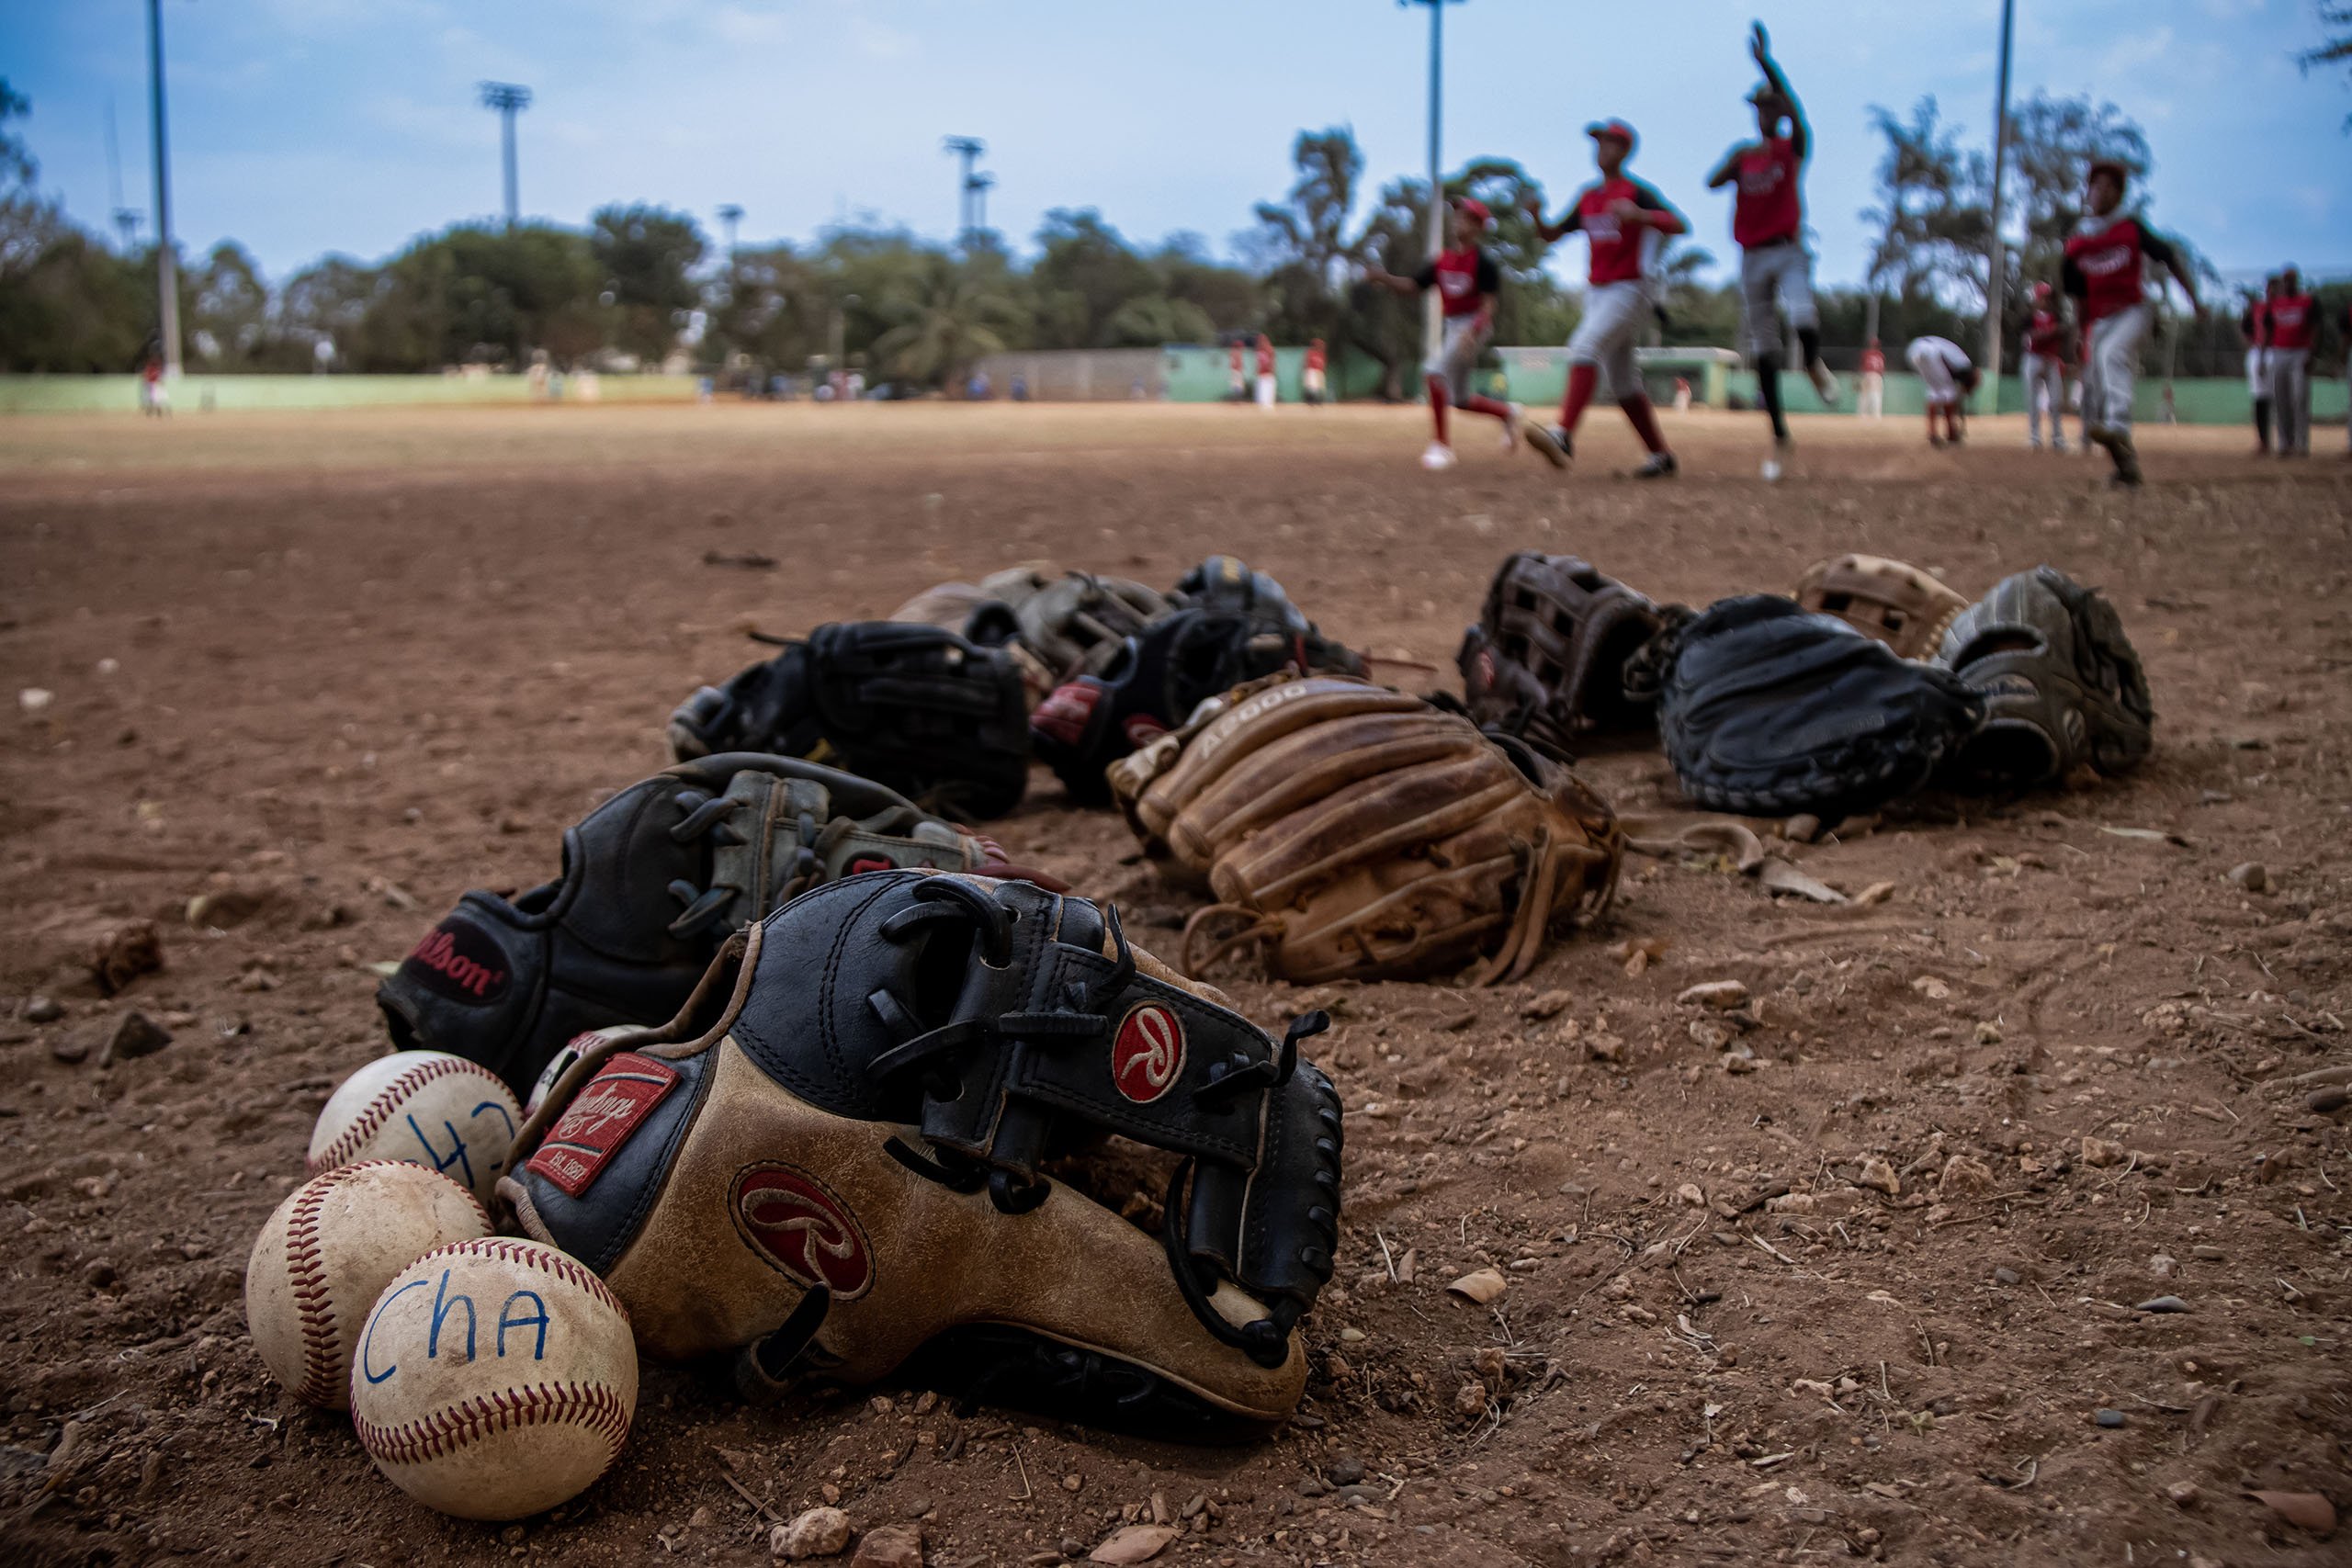 Leones D’Chaca League players leave their equipment on the ground while they warm up before starting play at the Félix Sánchez Olympic Stadium in Santo Domingo, Dominican Republic, on March 8, 2023. (Photo by Trilce Estrada Olvera/Cronkite Borderlands Project)
